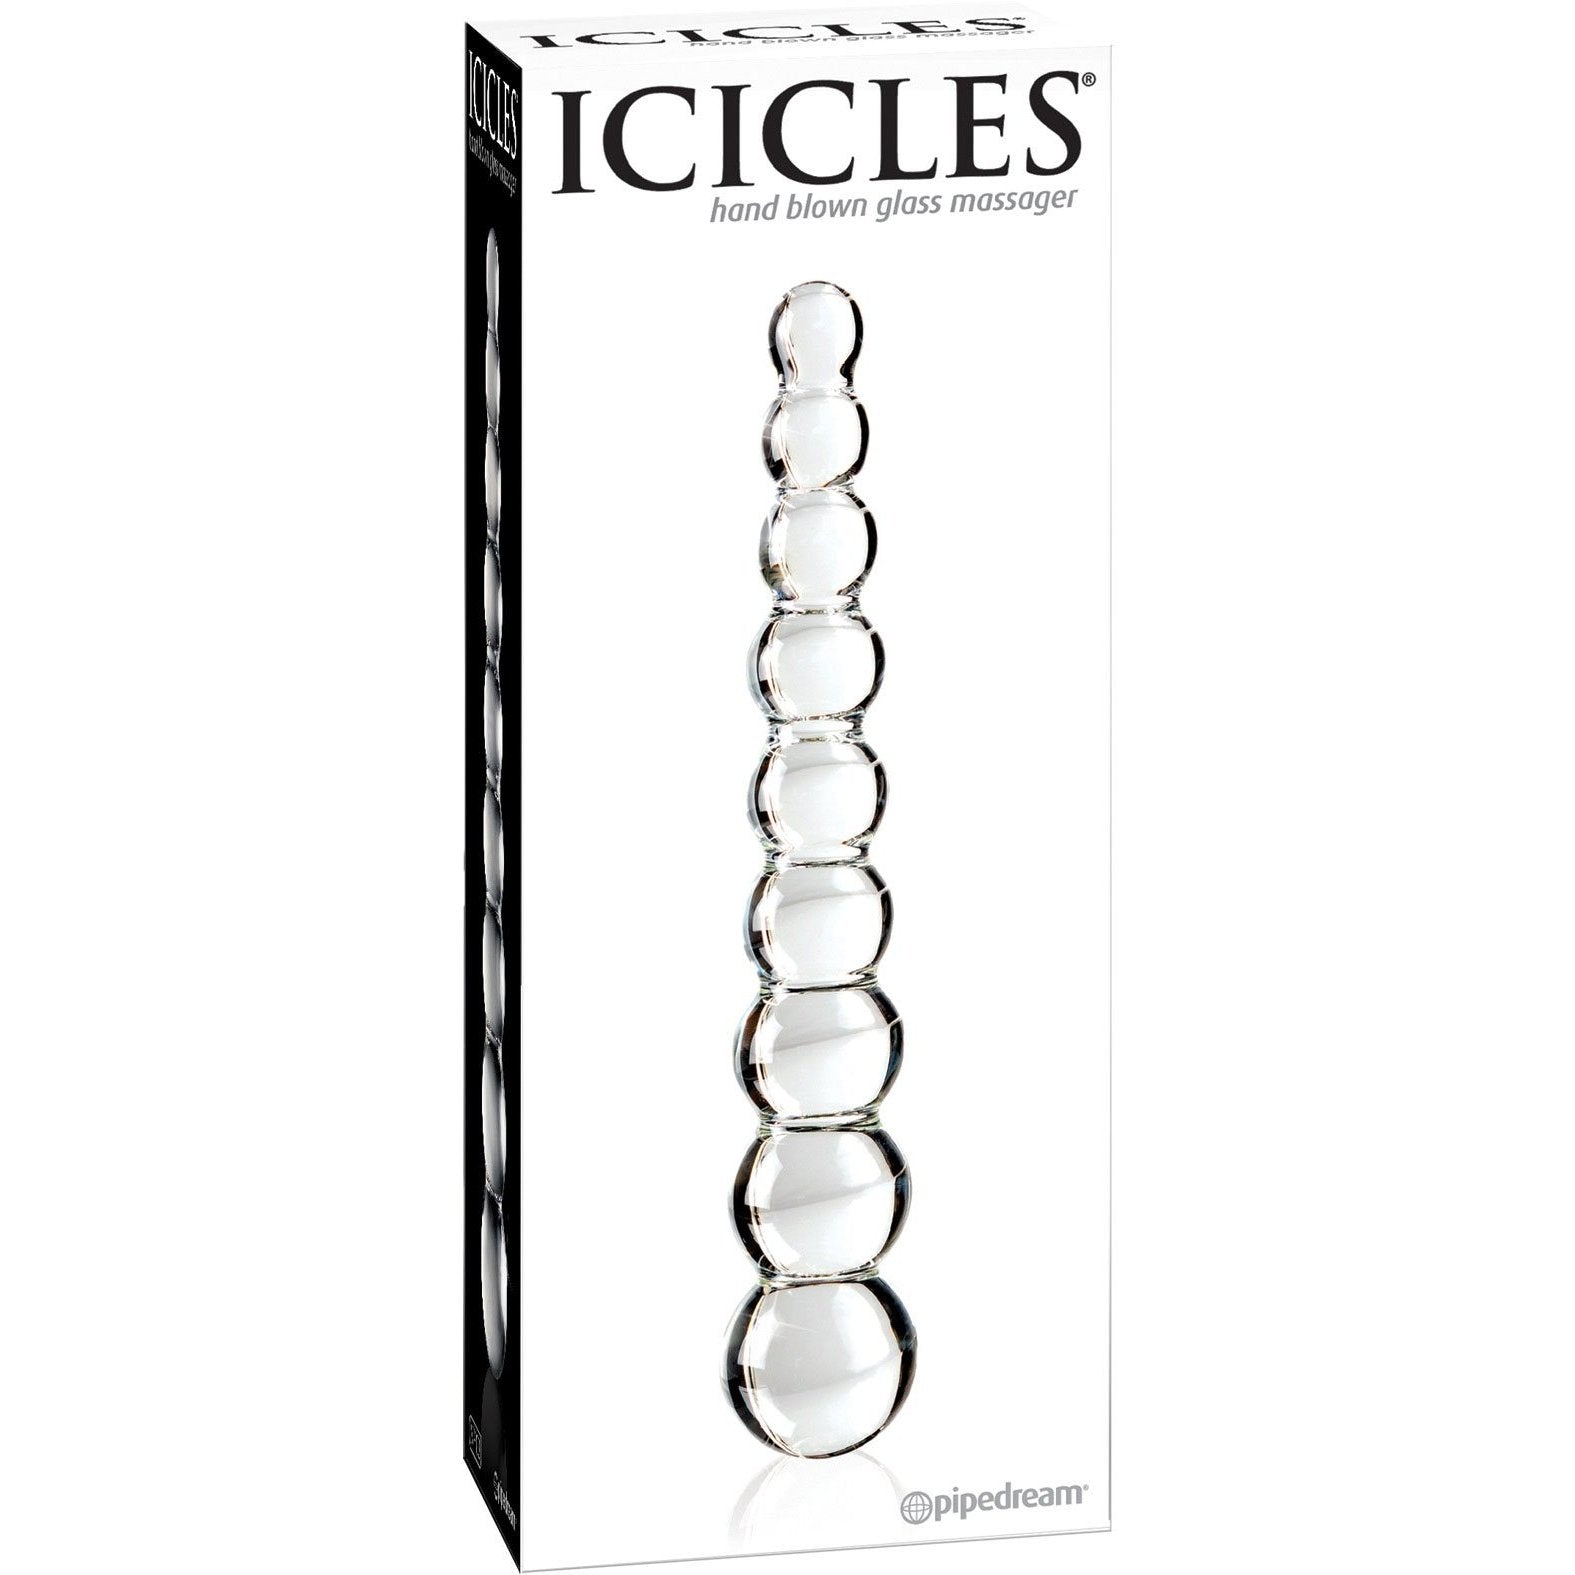 Icicles No. 2 Hand Blown Glass Massager - Rippled